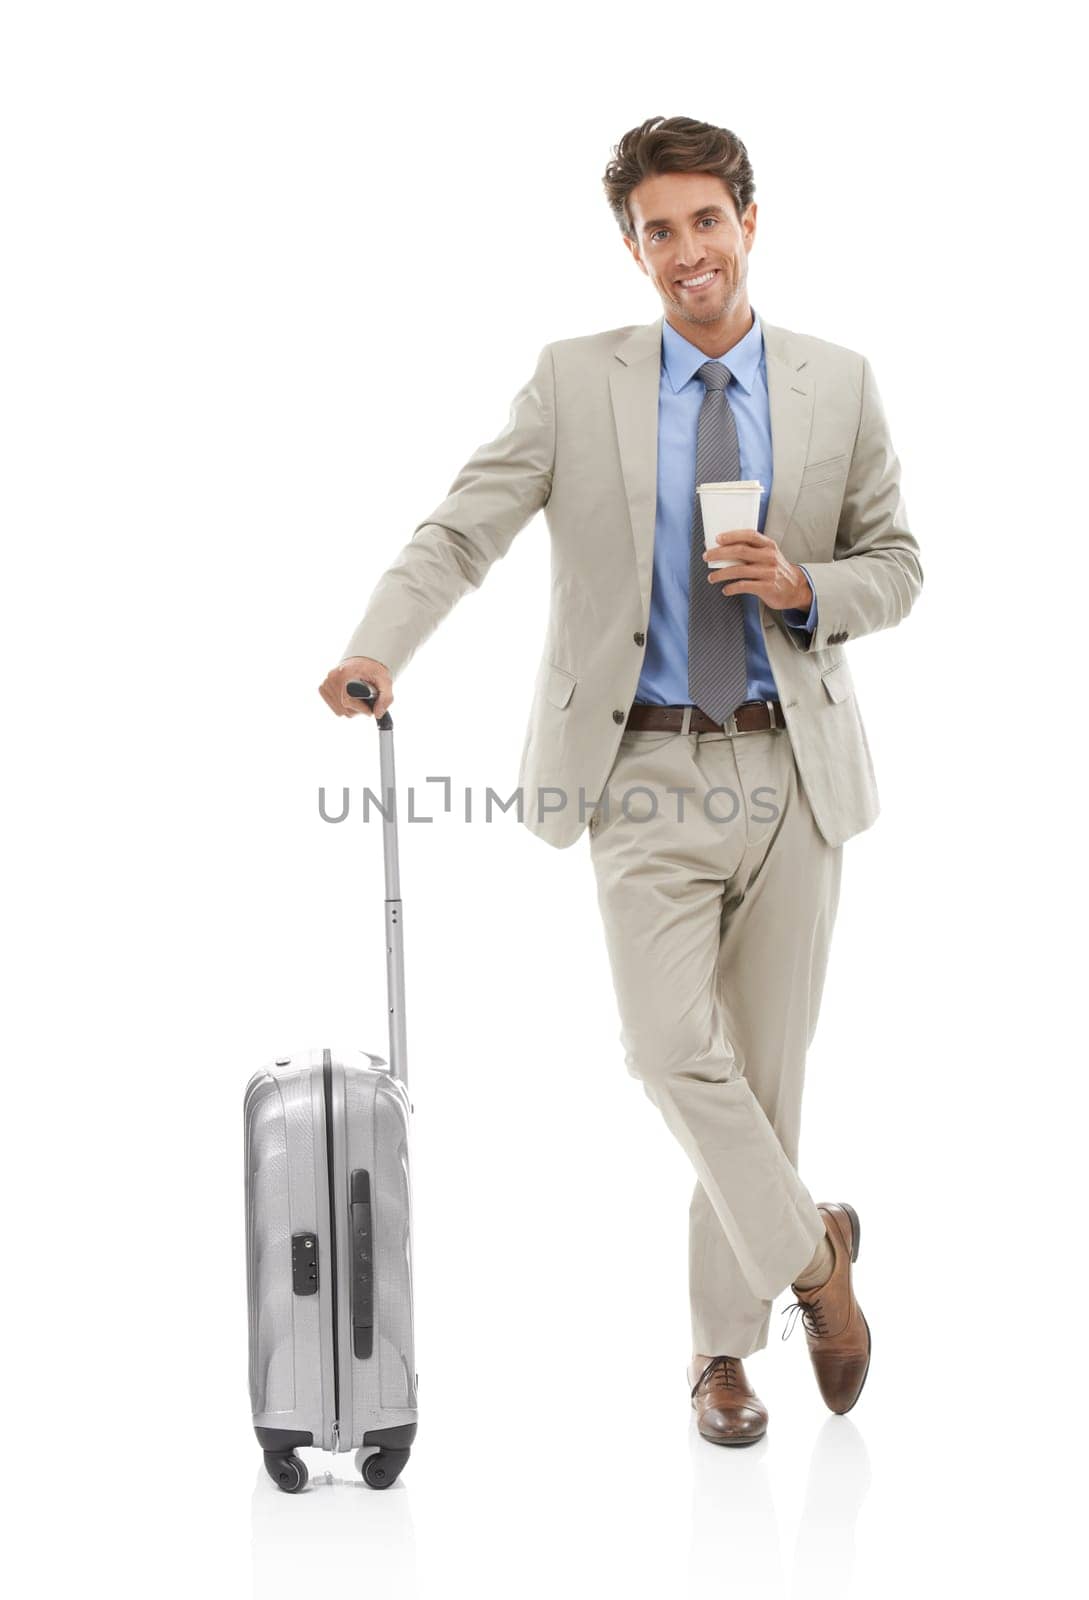 Travel is part of my business. Studio portrait of a young businessman with a suitcase and coffee isolated on white